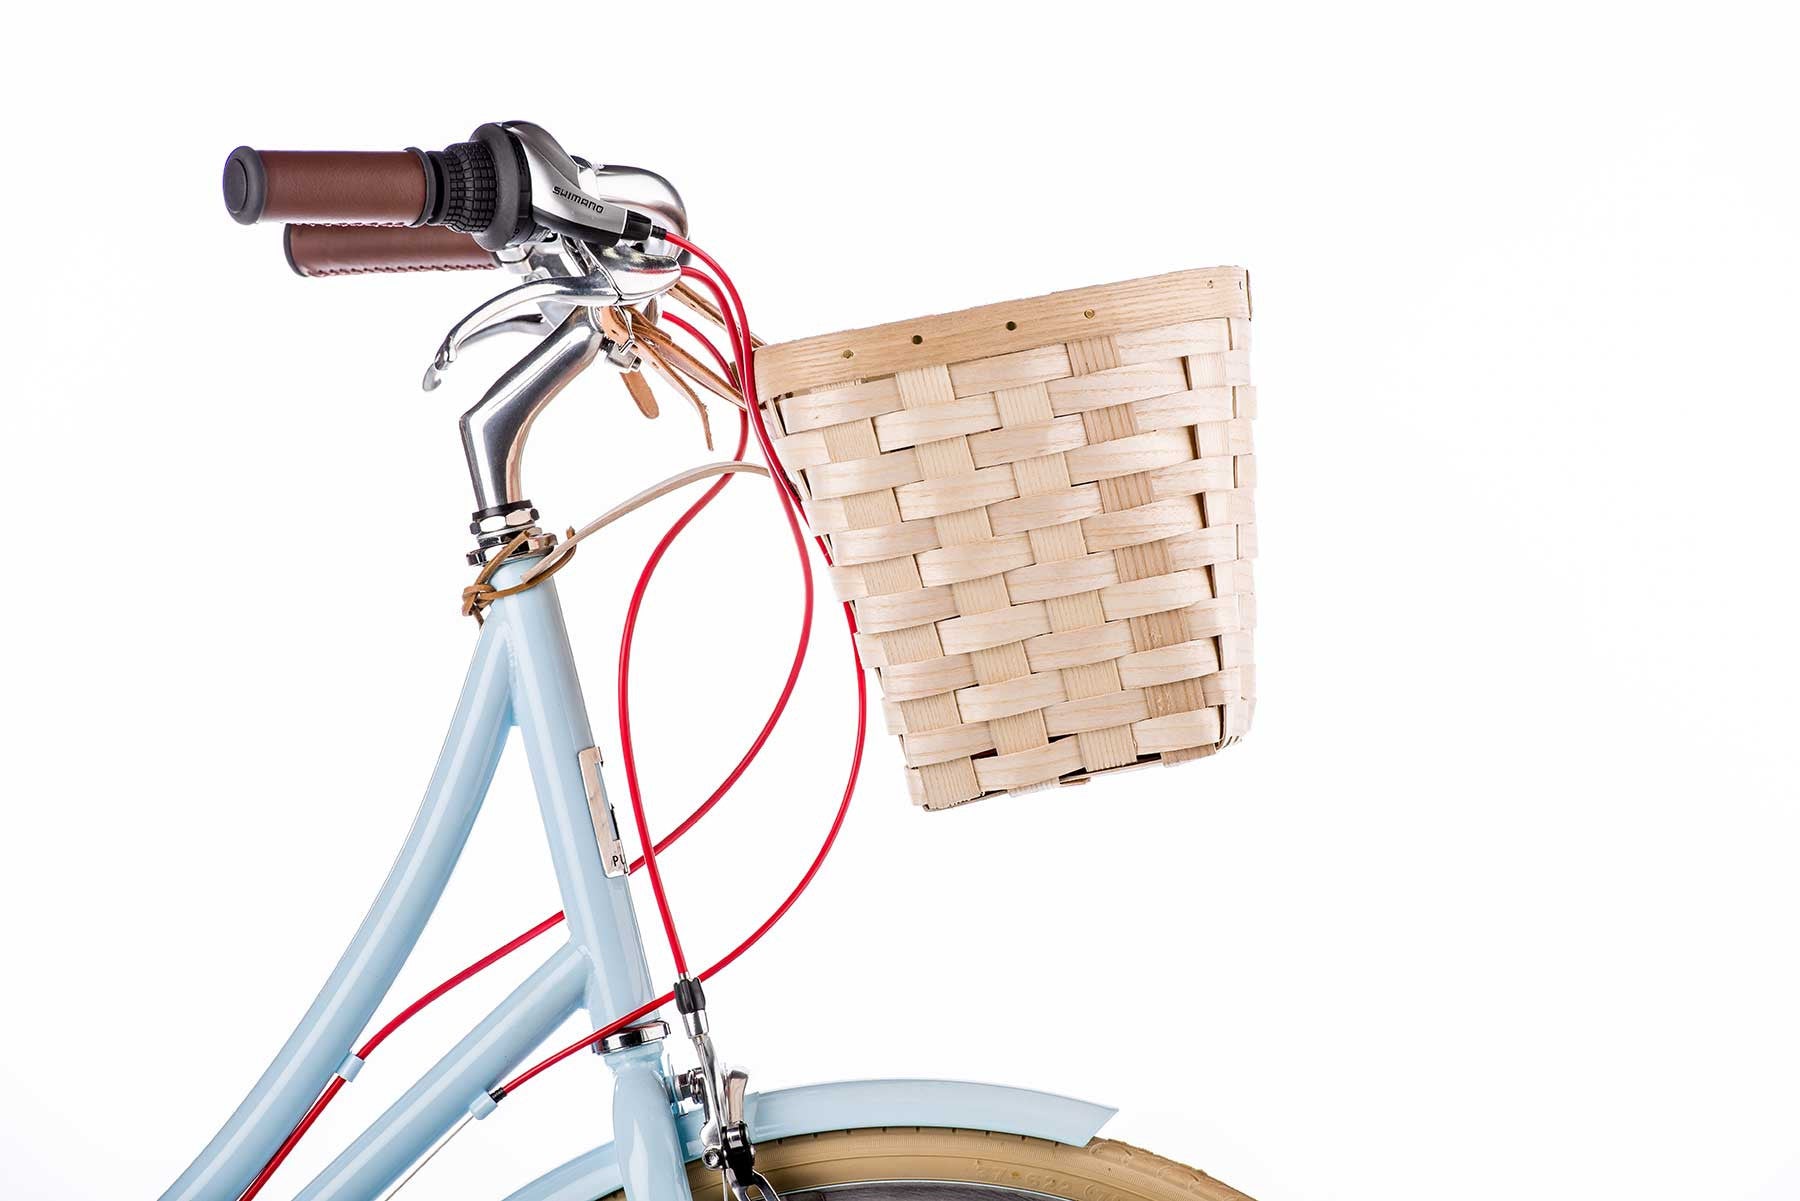 How to choose a basket for your bike - Rolling Spoke